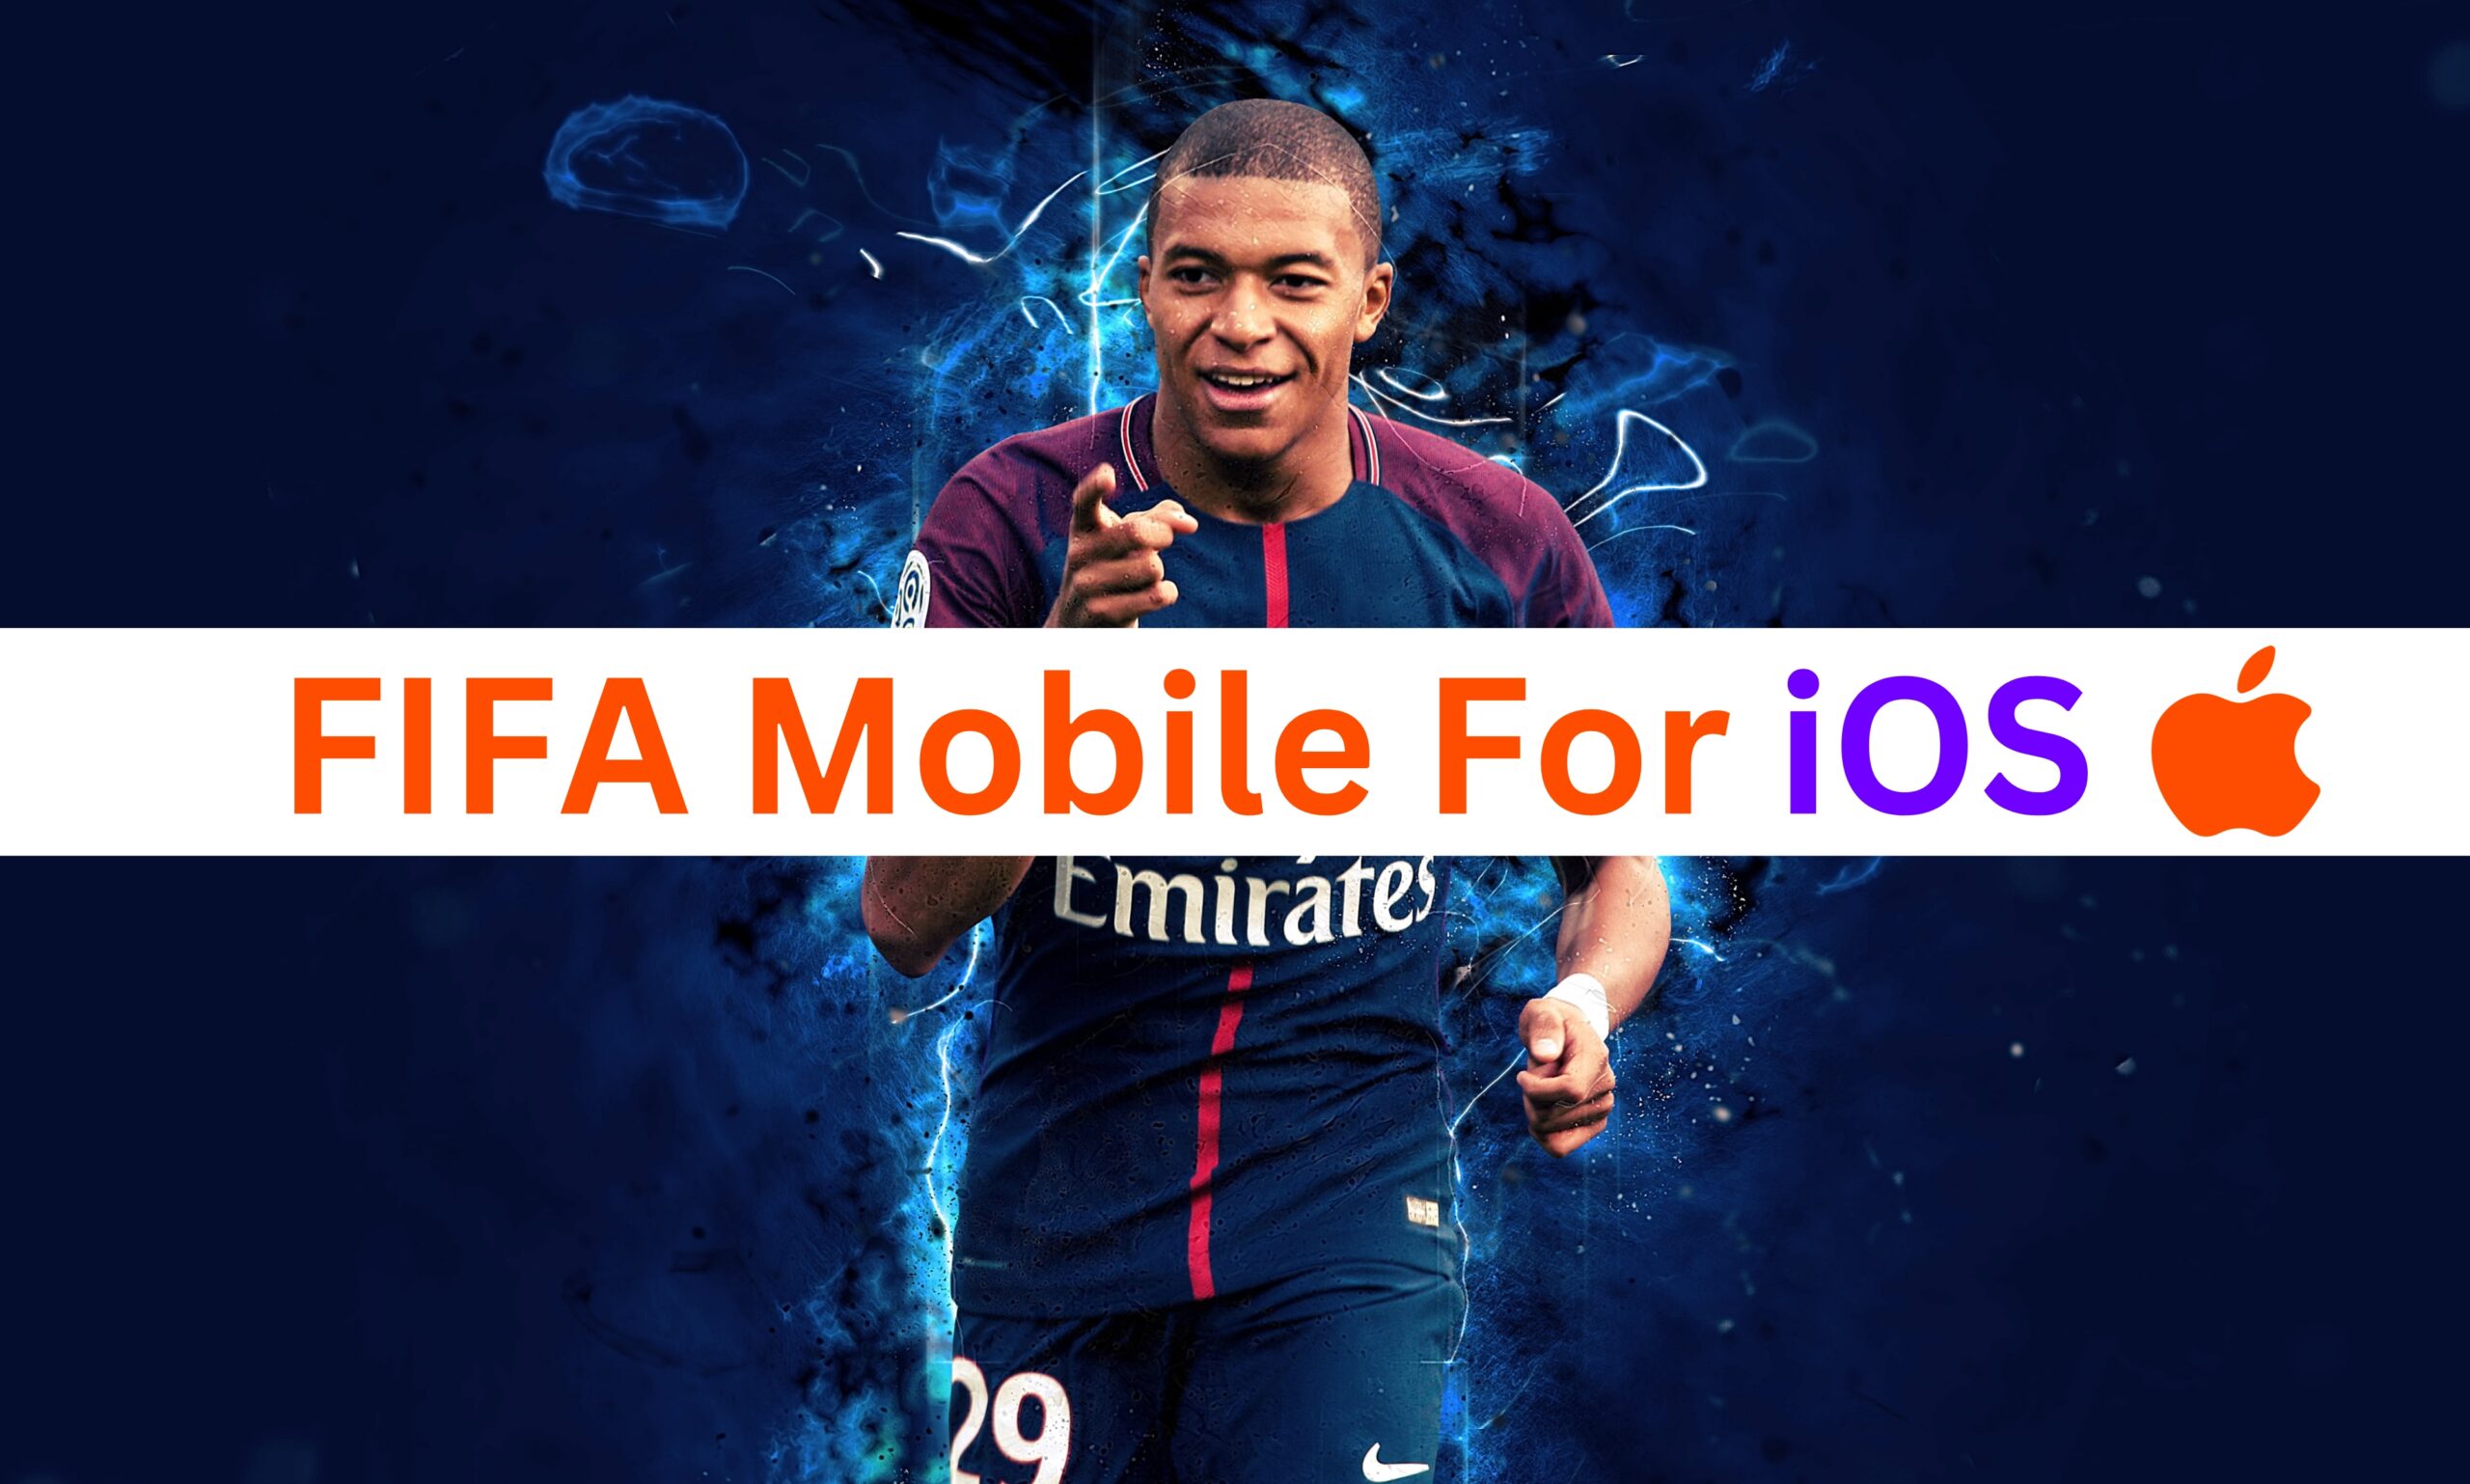 FIFA Mobile For iOS